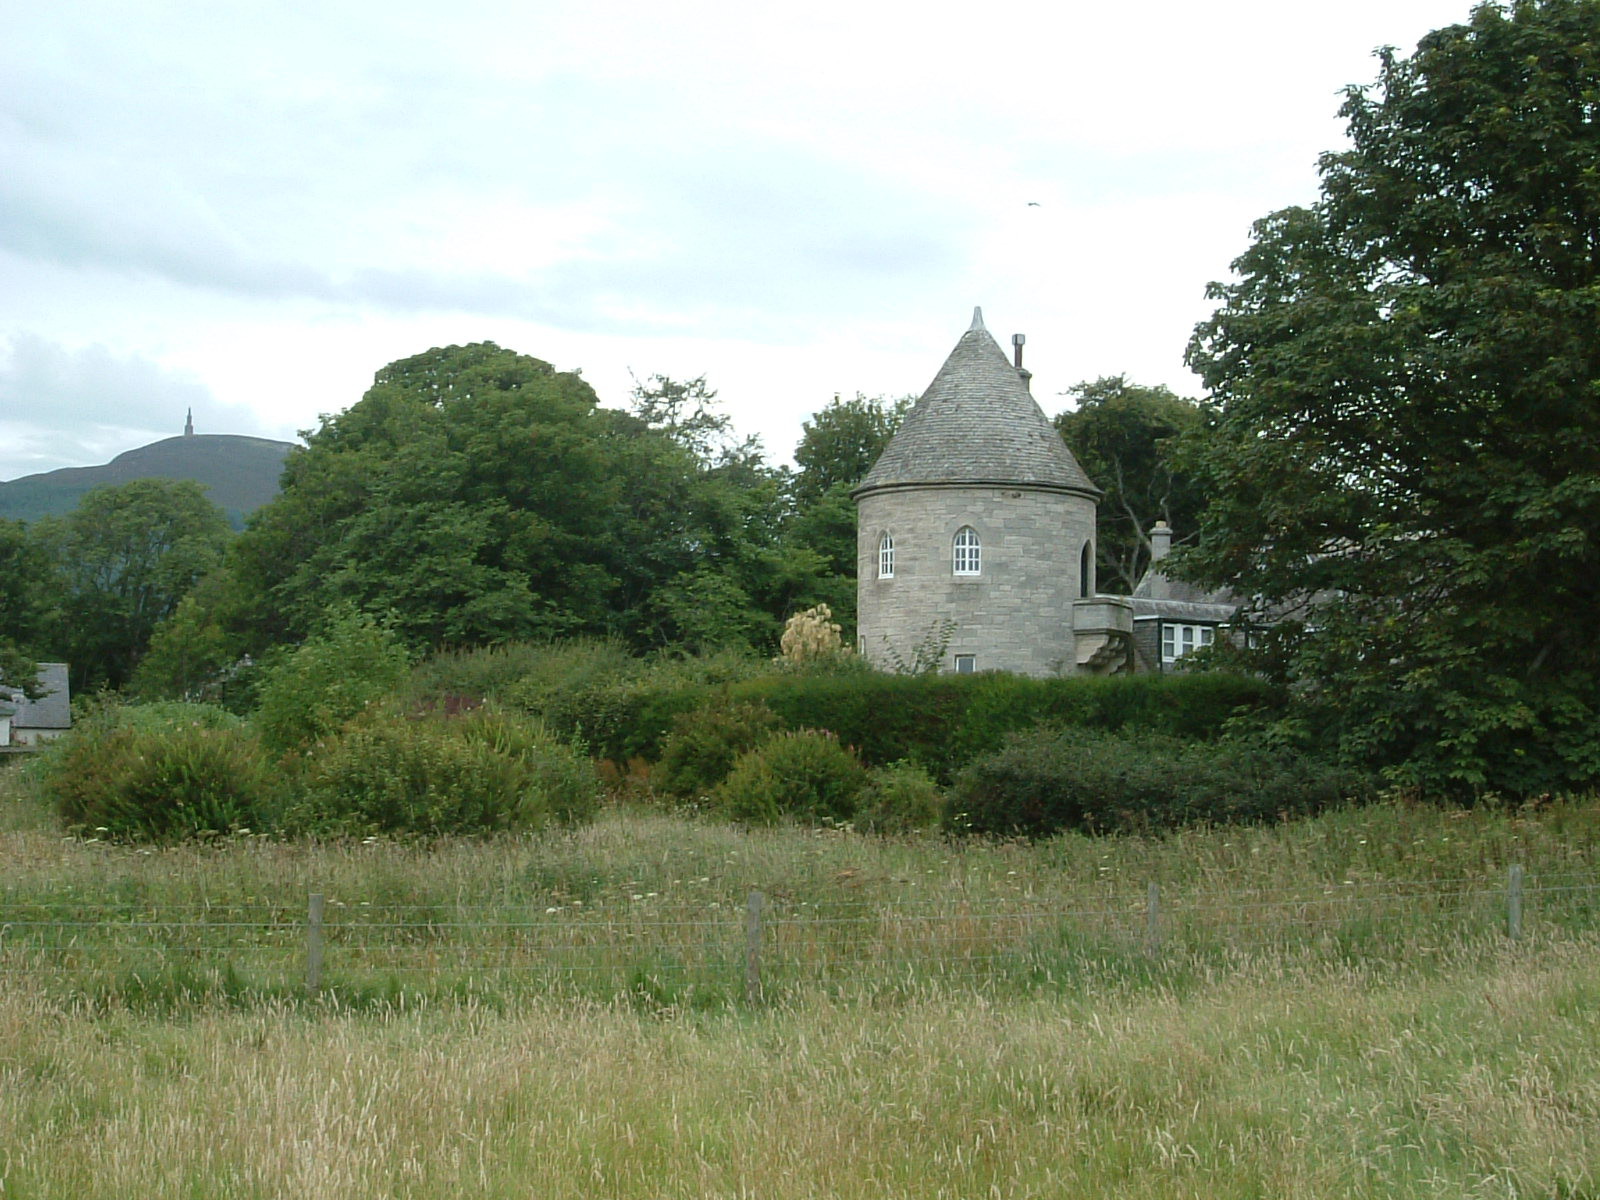 Tower Lodge with Ben Bhraggie in the background, topped by a large statue of the first Duke of Sutherland